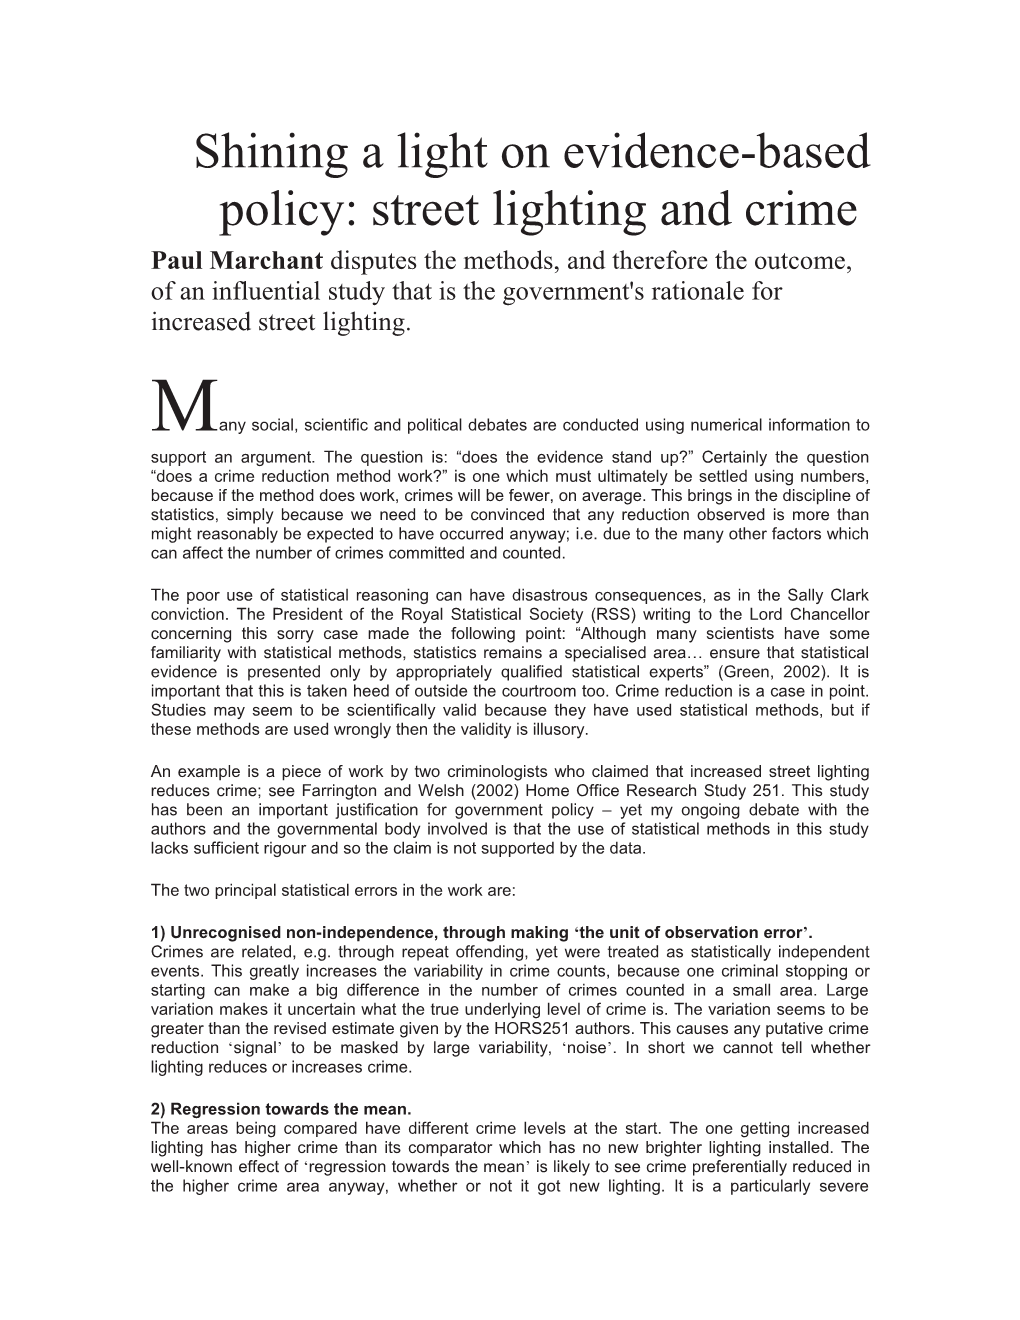 Shining a Light on Evidence-Based Policy: Street Lighting and Crime